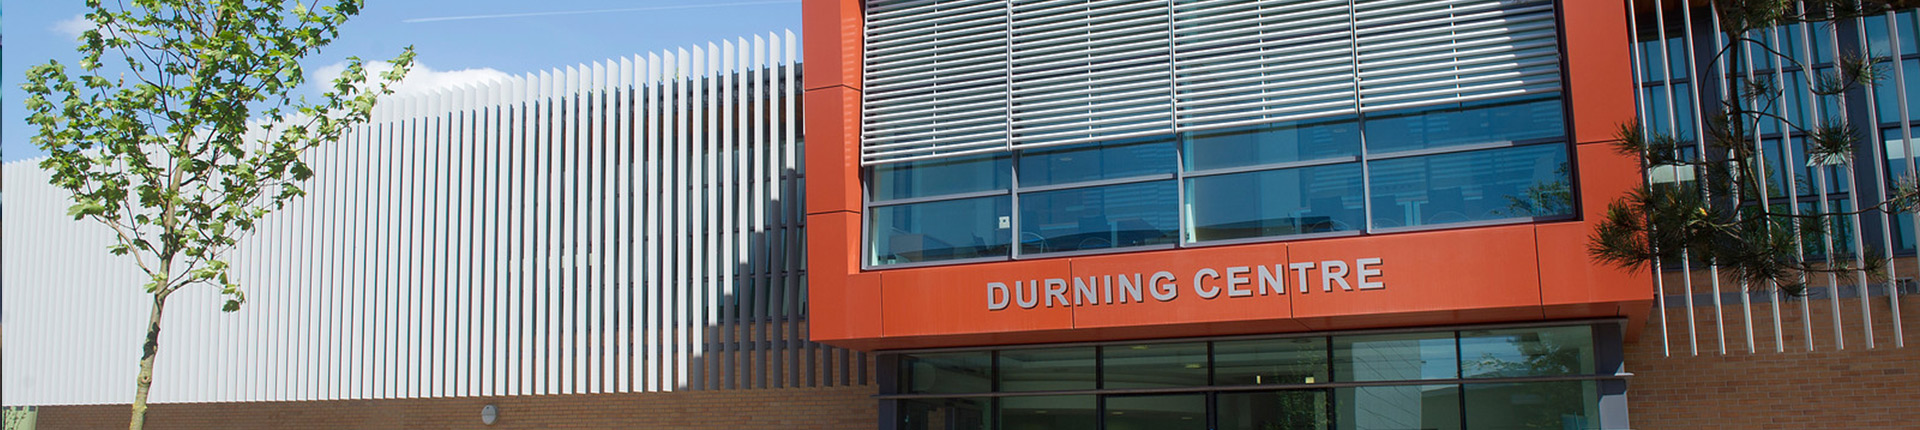 An outside image of the durning centre